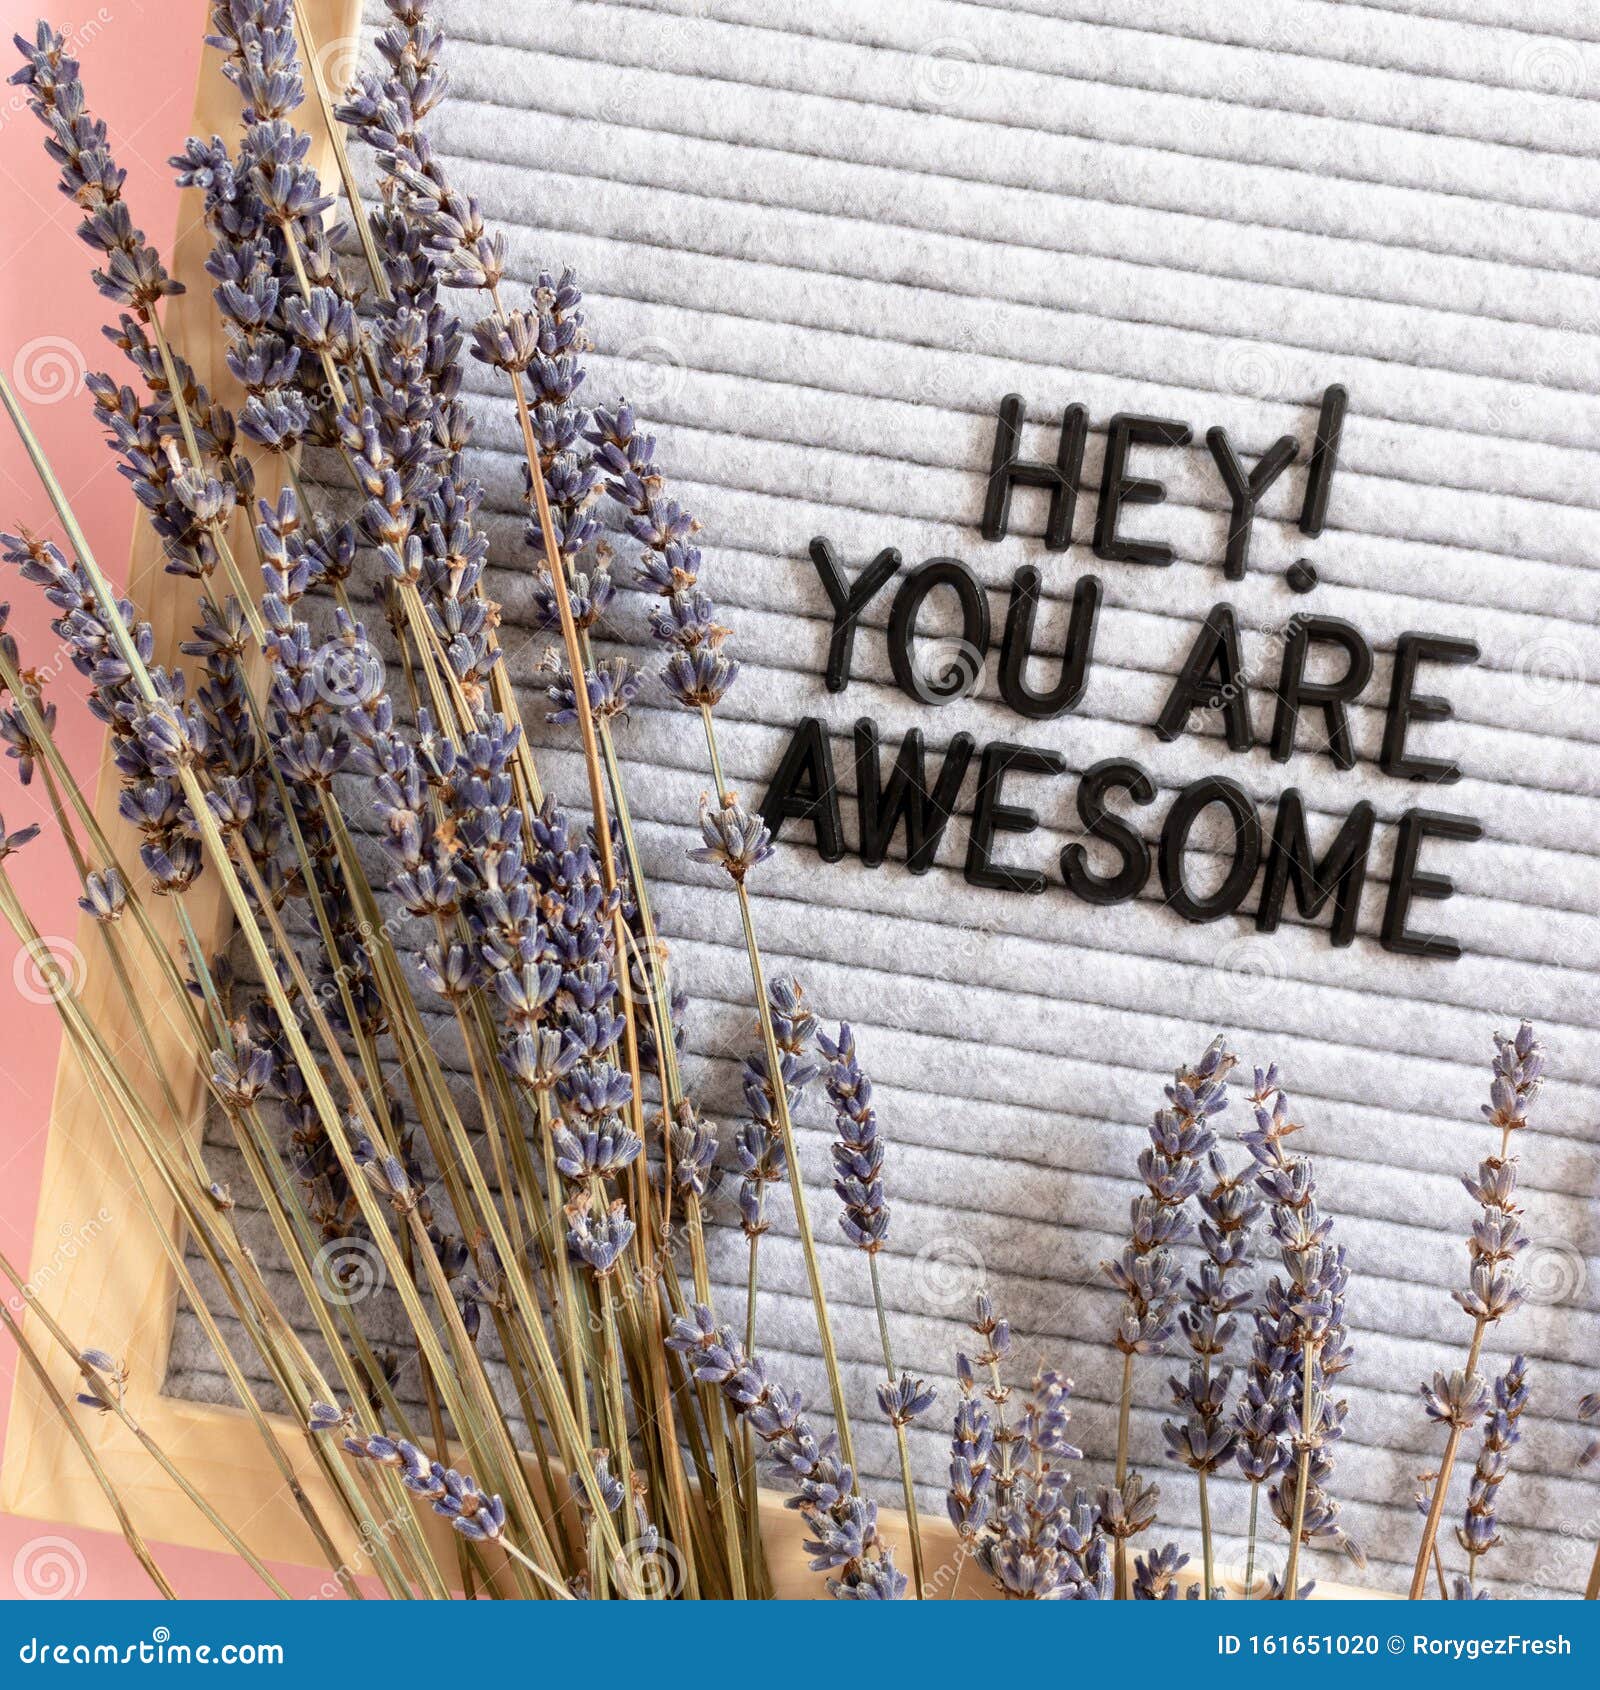 hey you are awesome